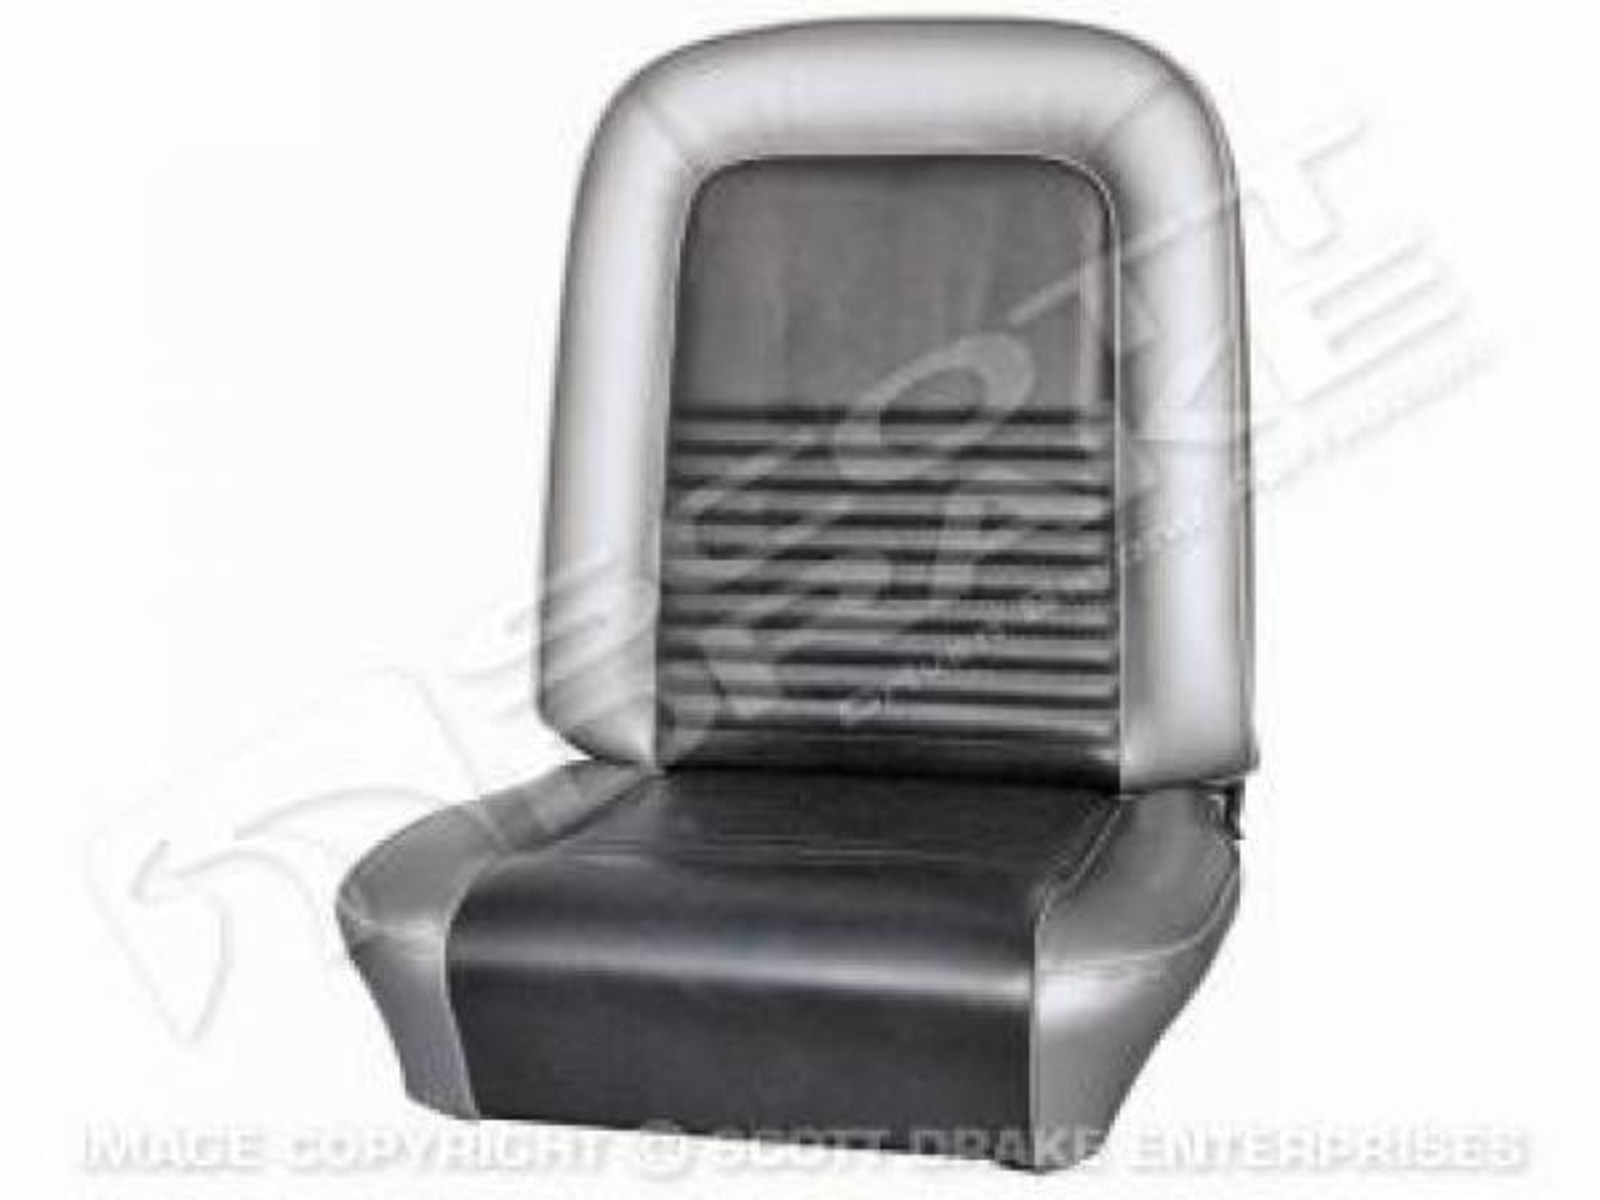 65 Front Bucket Upholstery Palom